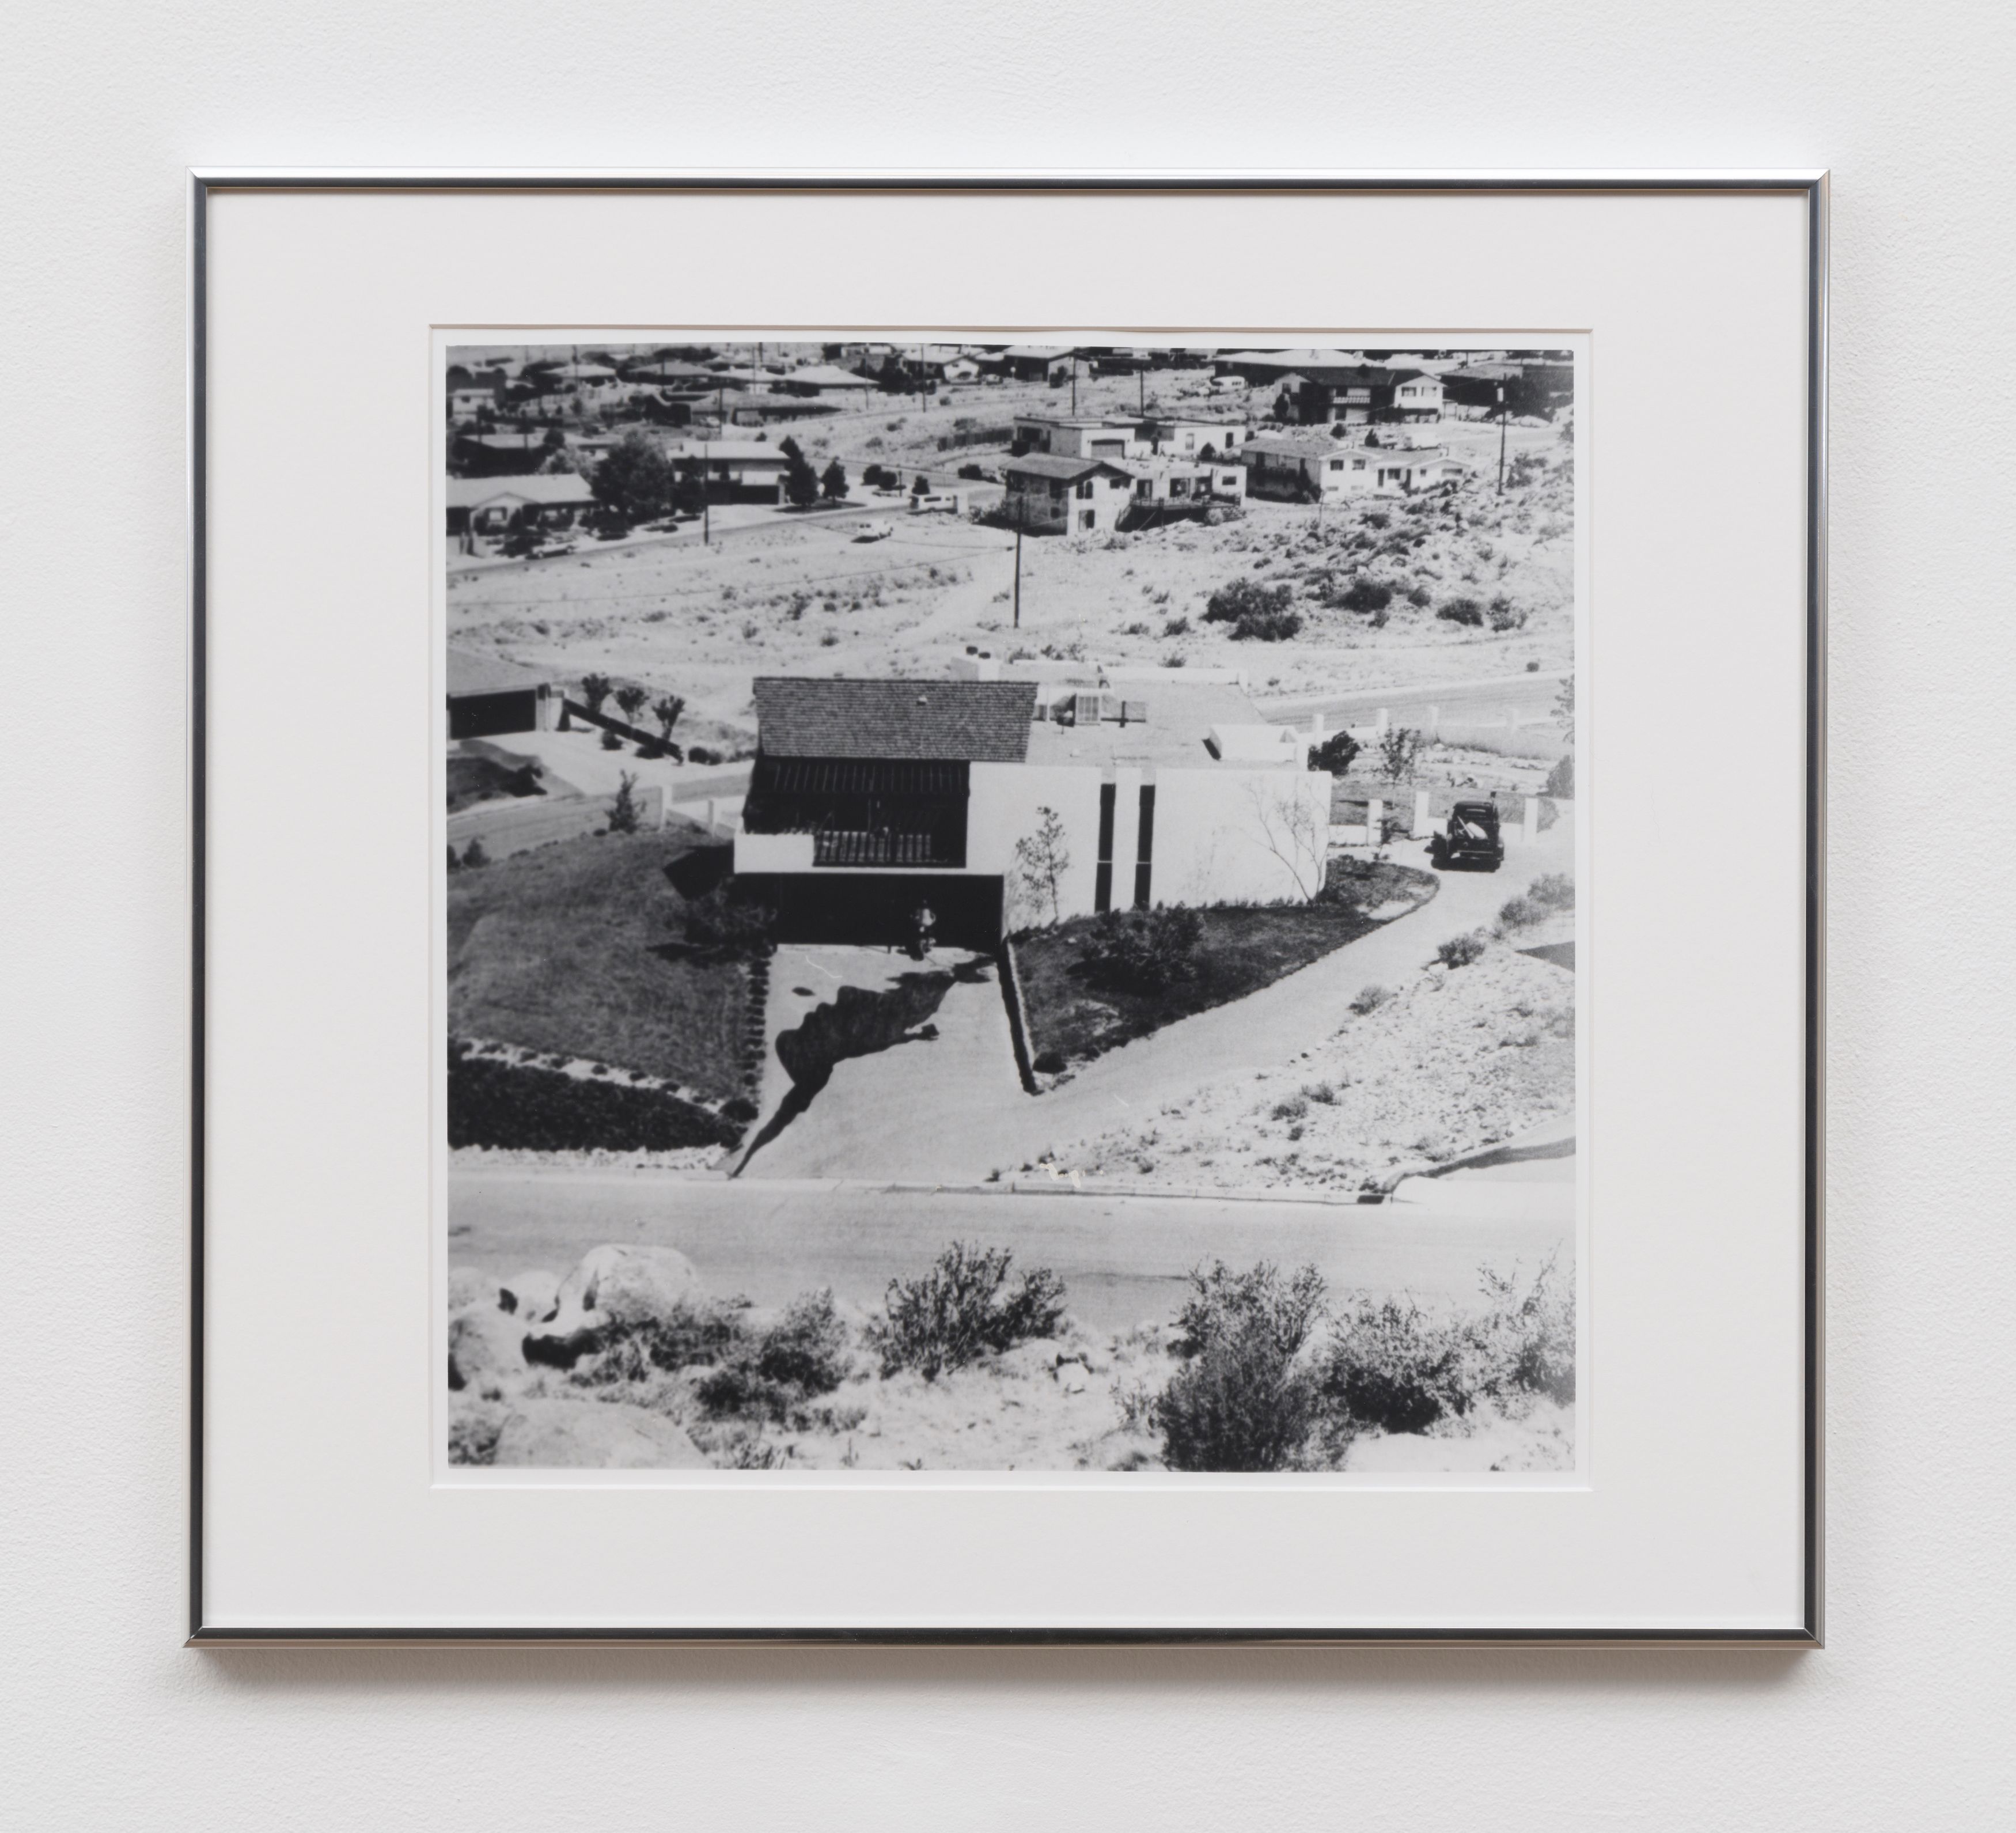 Erin Calla Watson, Untitled View (Albuquerque), 2023, gelatin silver print, 14 x 14 in. (35.56 x 35.56 cm) (image size), 18 x 20 in. (45.72 x 50.08 cm) (framed size), edition of 3 with 2 AP